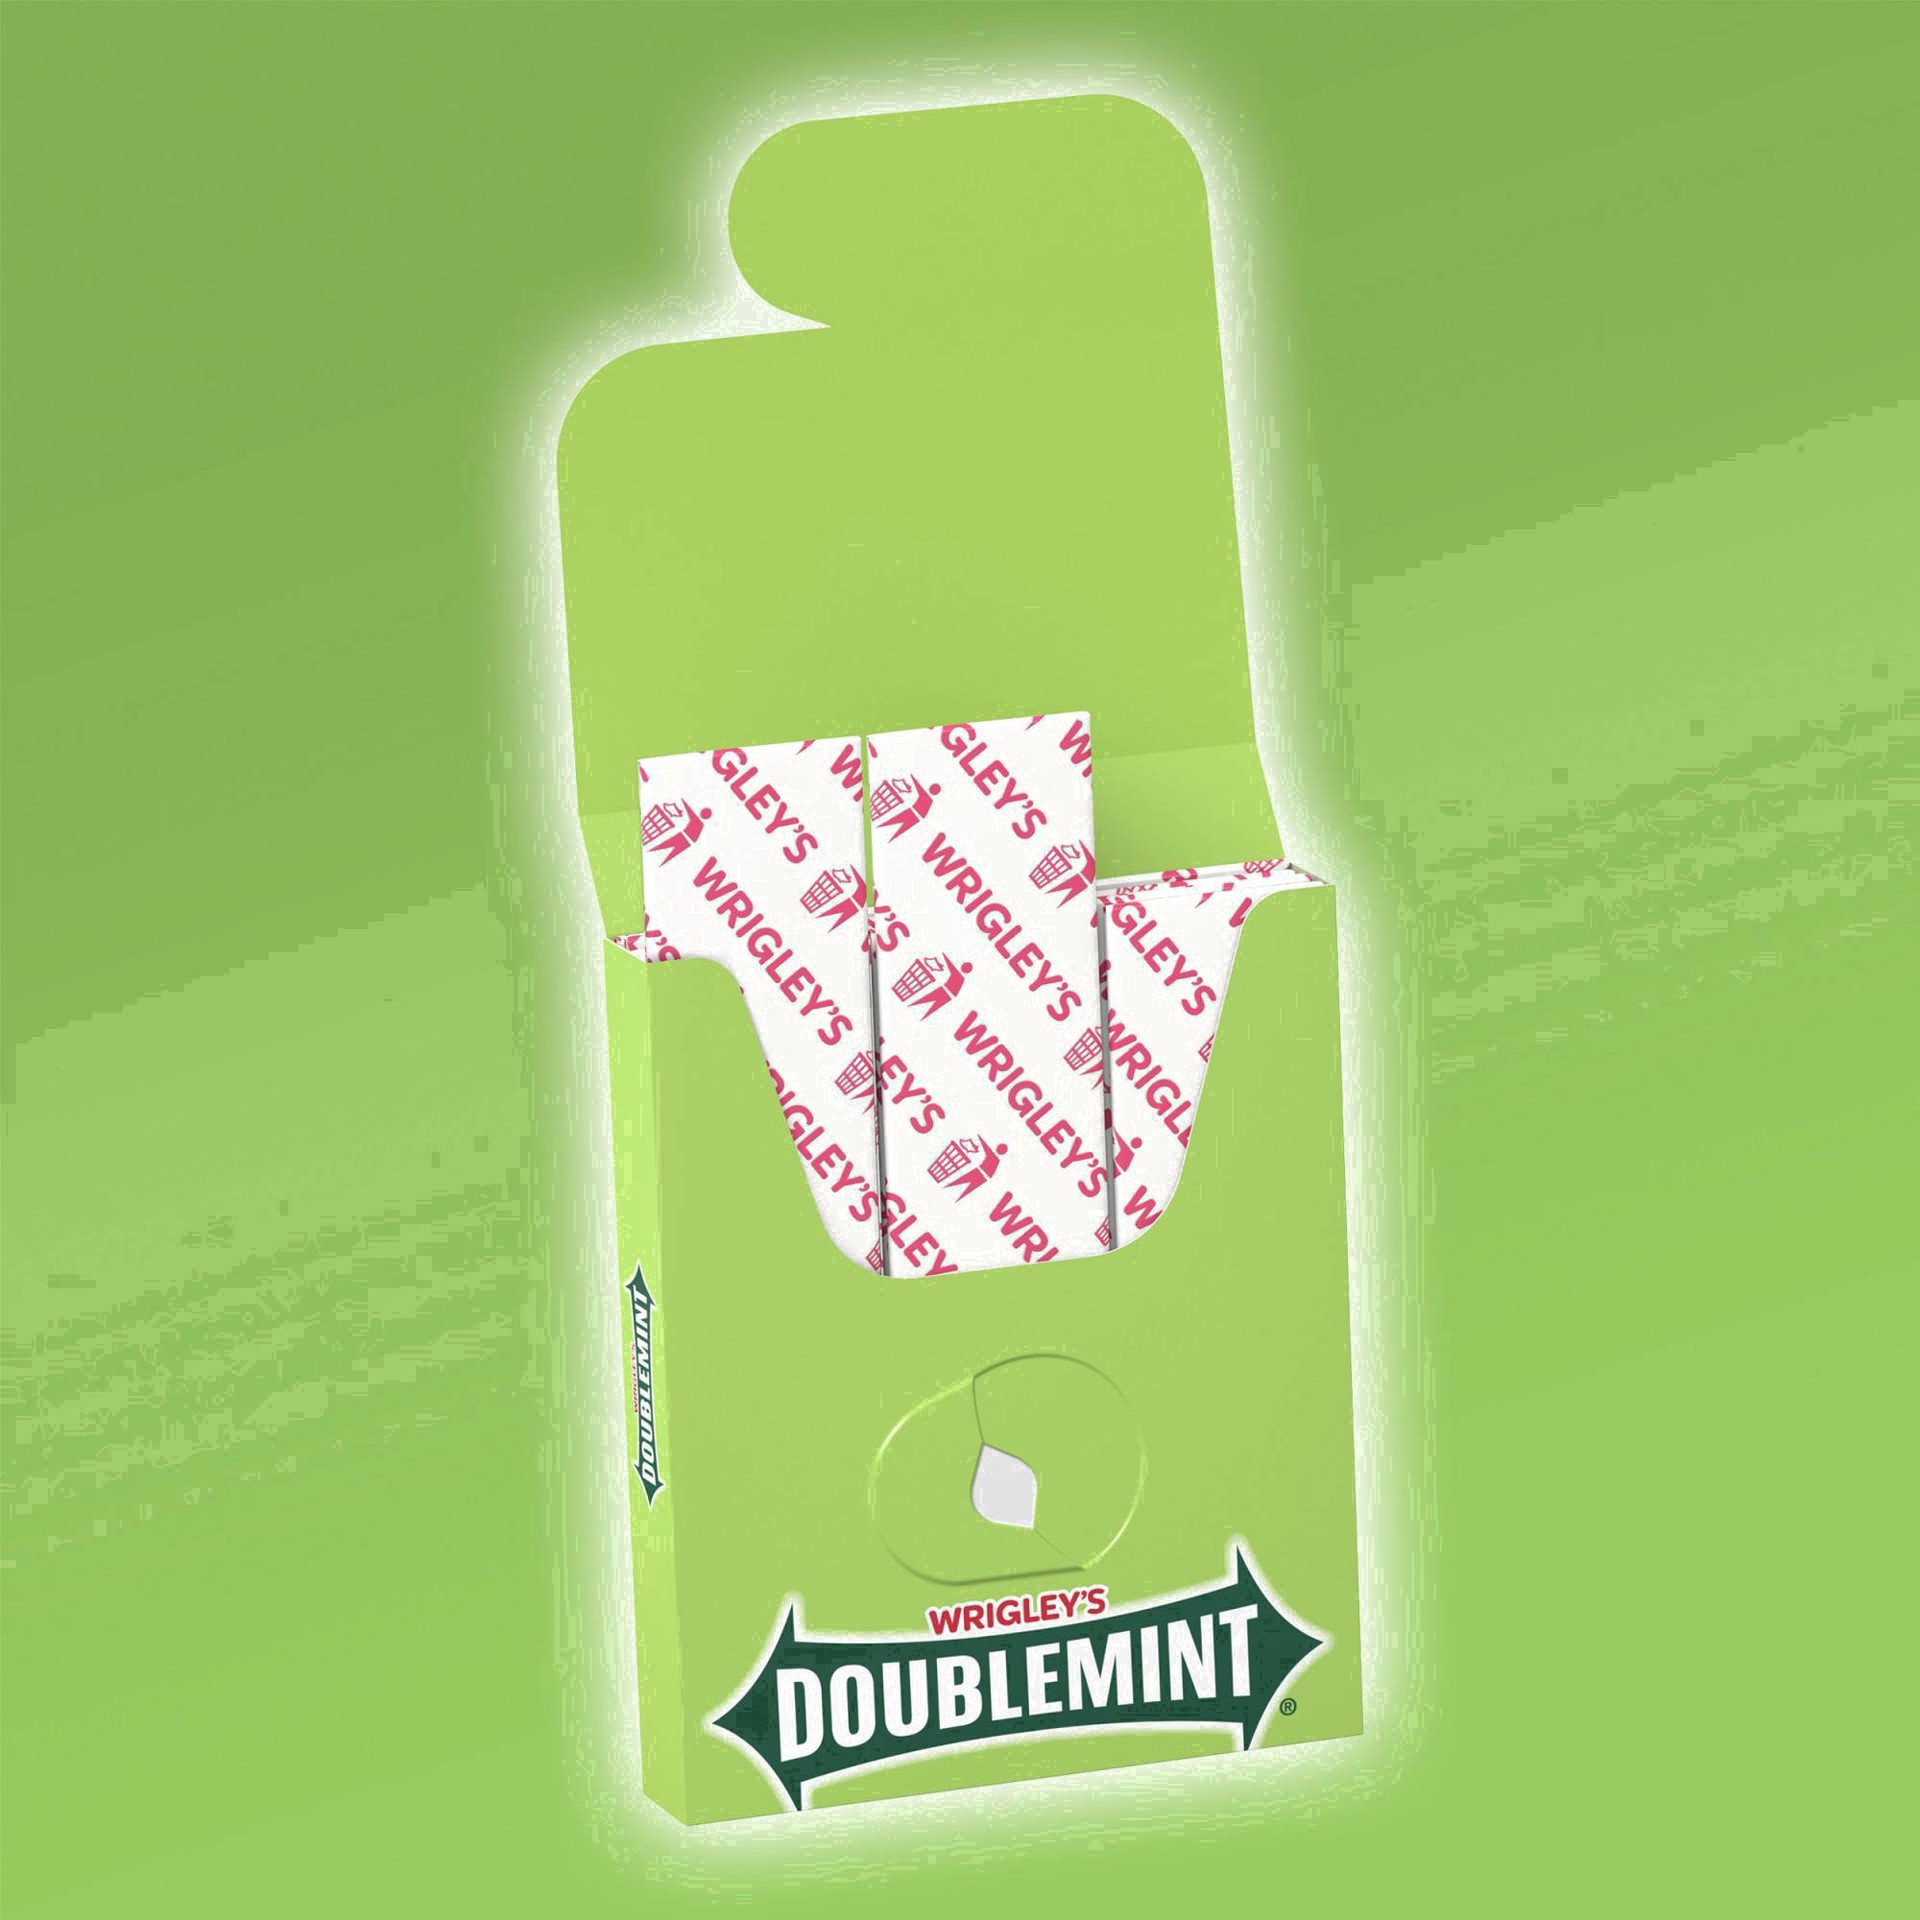 slide 24 of 134, Doublemint WRIGLEY'S DOUBLEMINT Bulk Chewing Gum, Value Pack, 15 ct (3 Pack), 45 ct